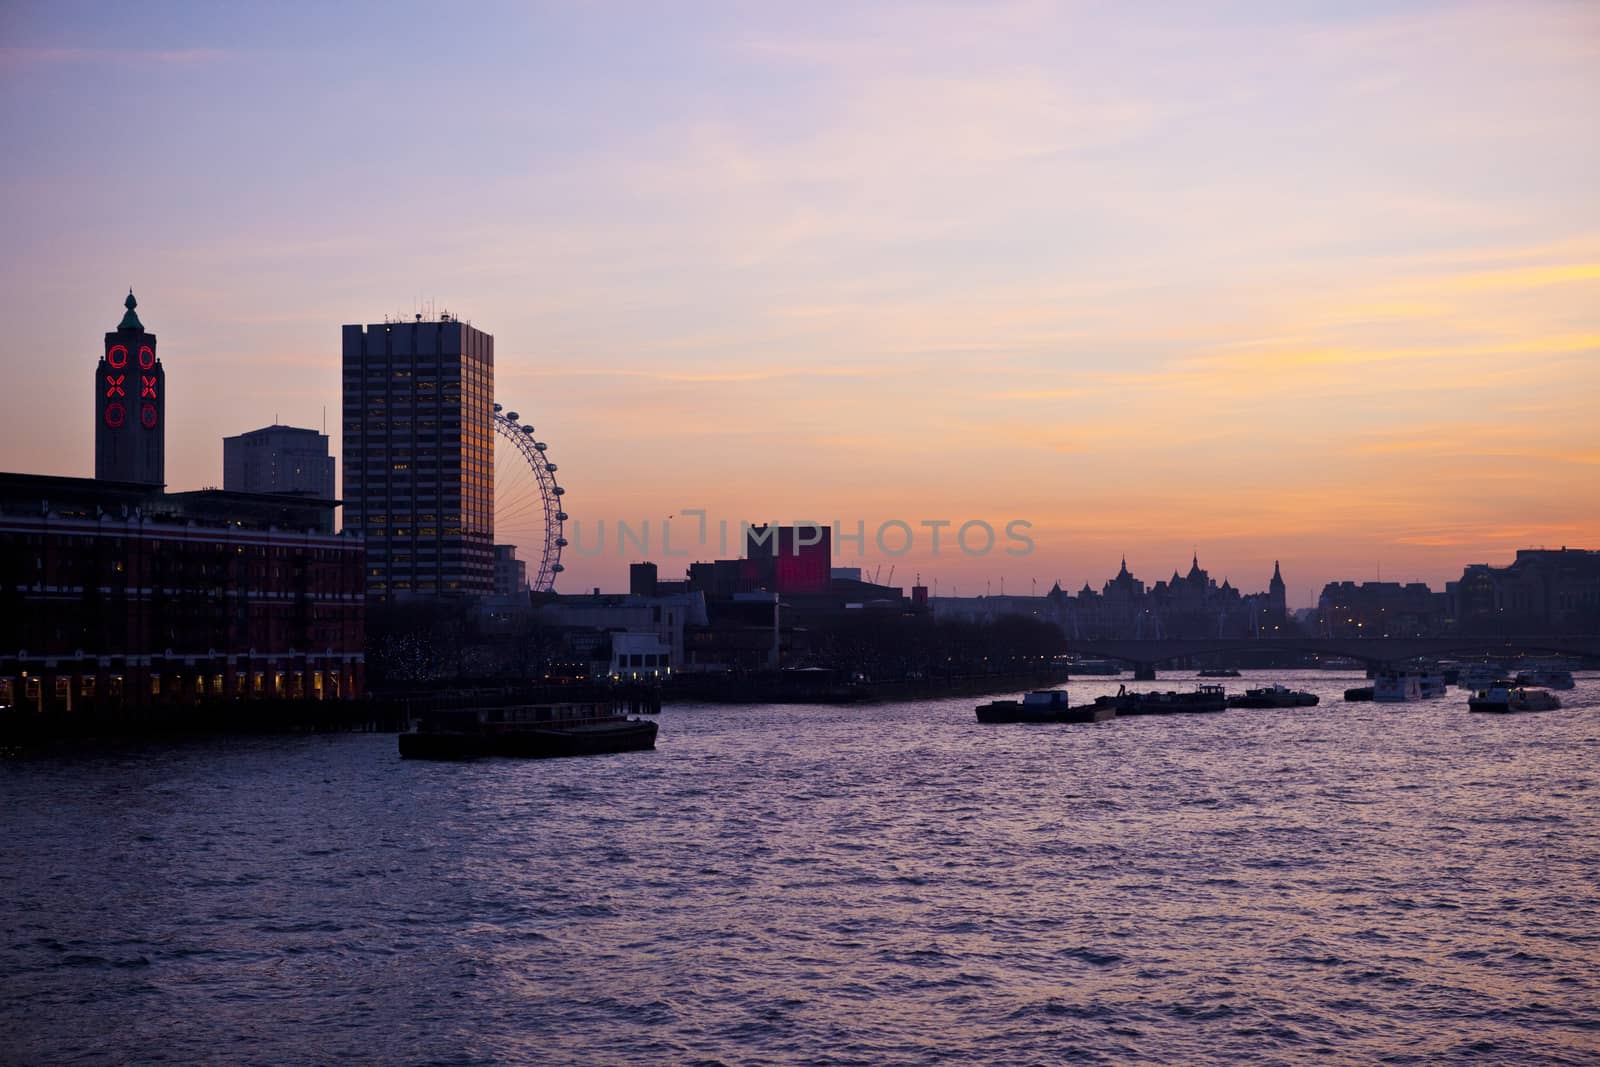 A beautiful sunset in London taking in the River Thames, London Eye and Oxo Tower.